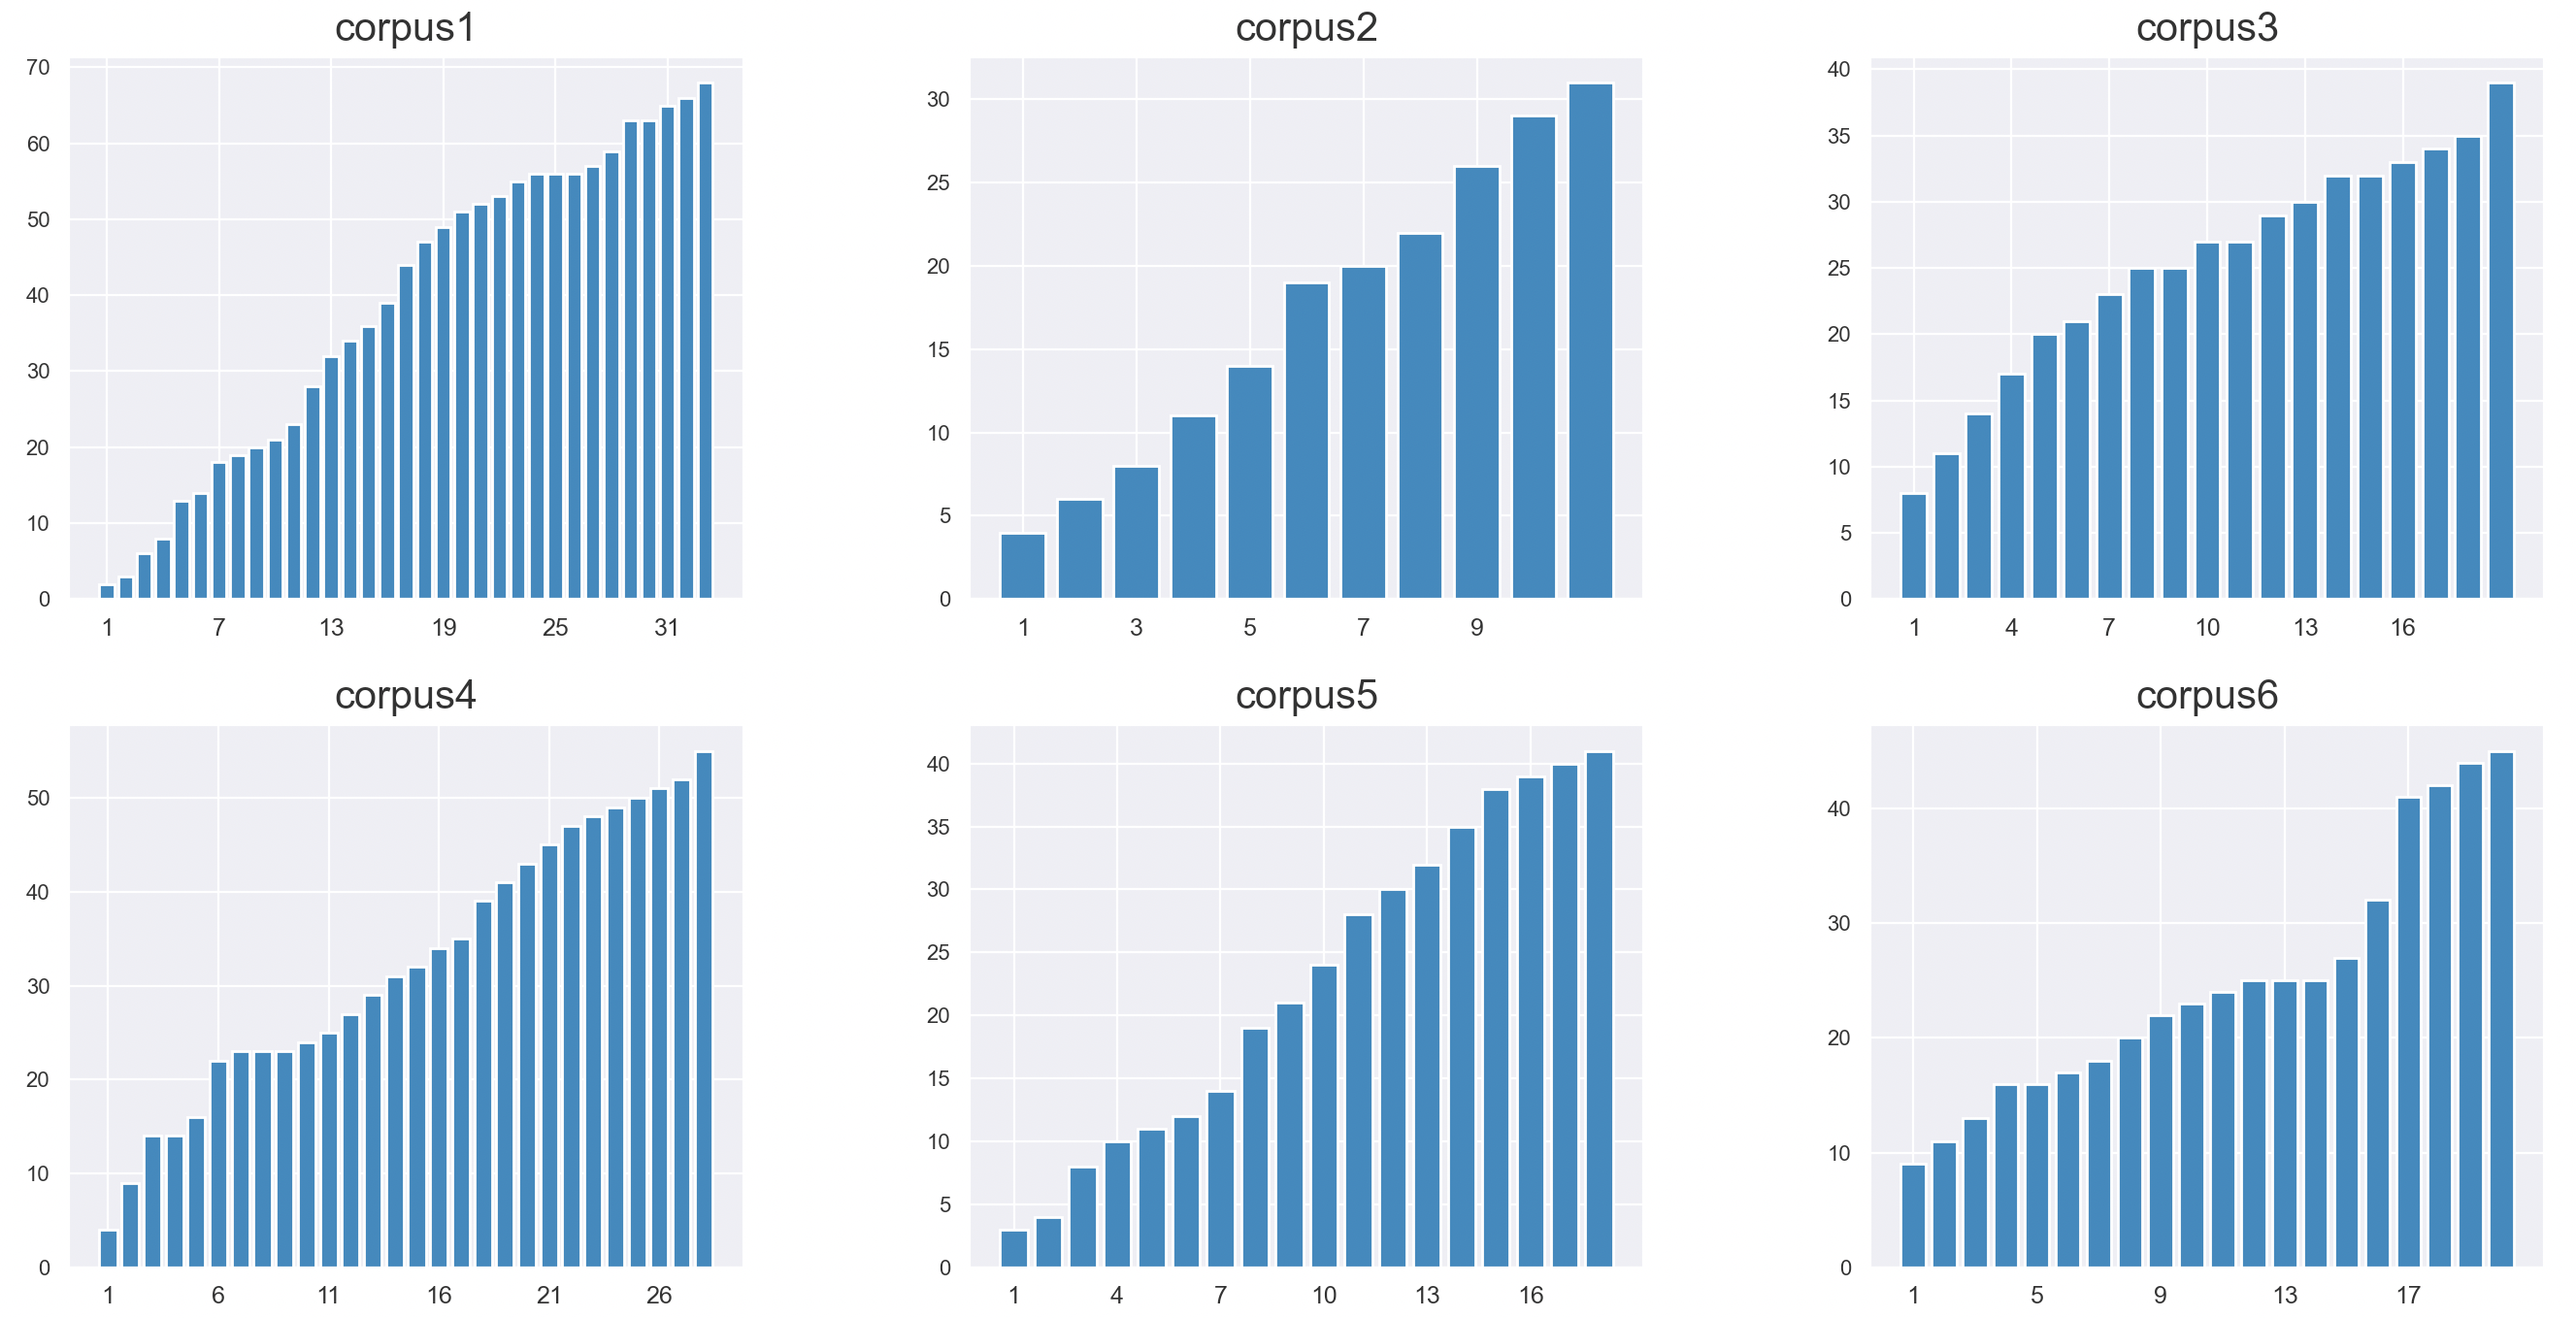 Histogram representing the number of new keywords brought by each document along the course